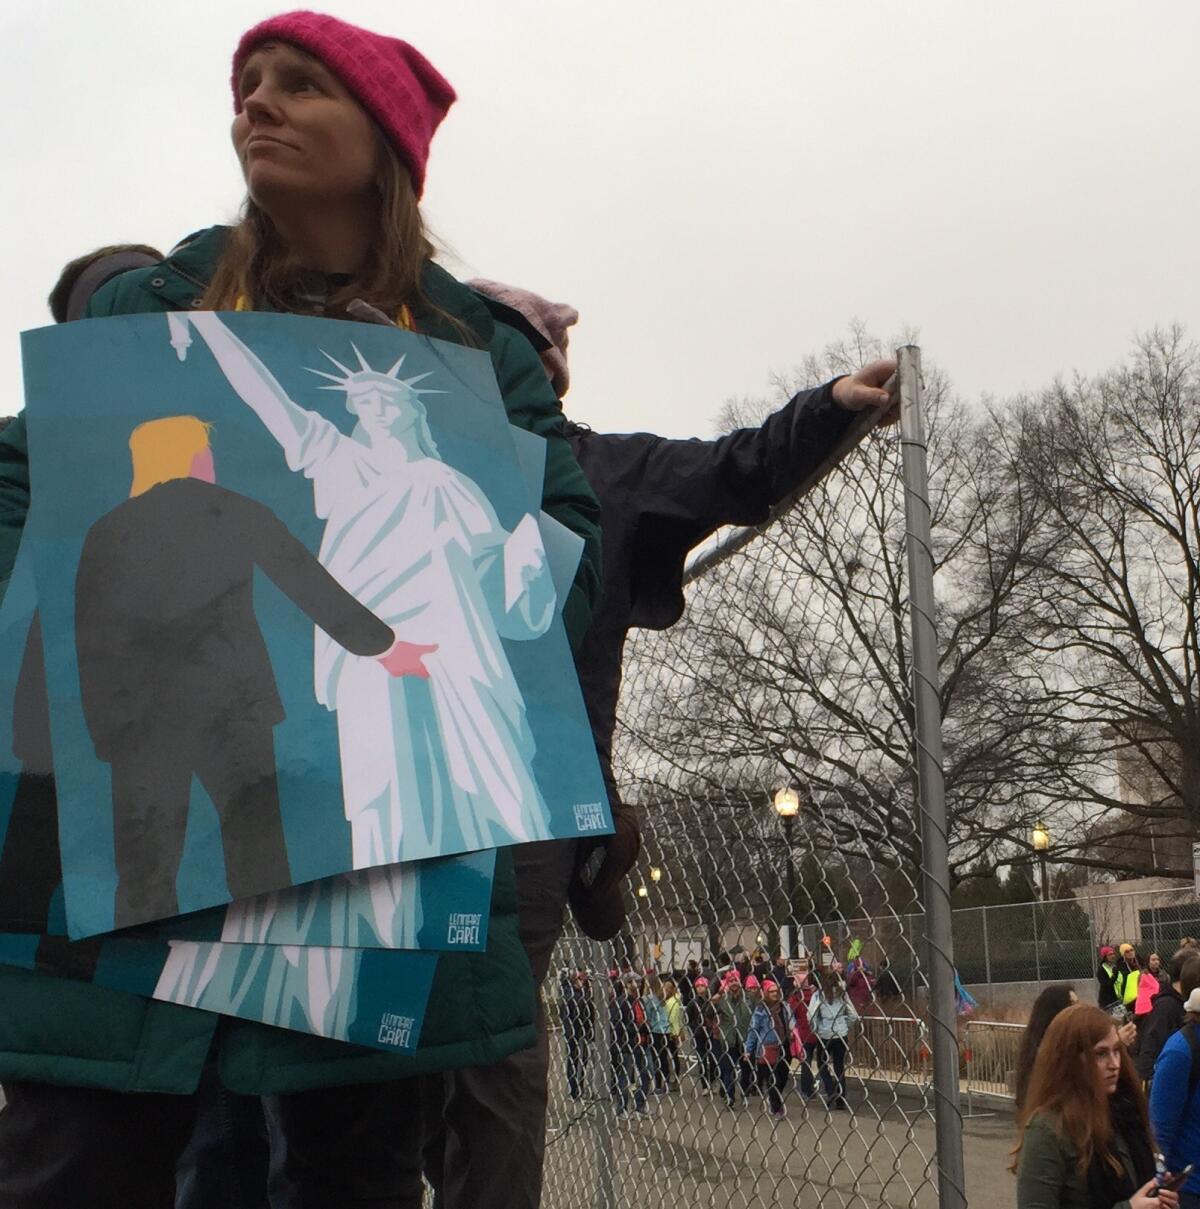 A protestor at the Women's March on Washington holds posters by German illustrator Lennart Gabel.